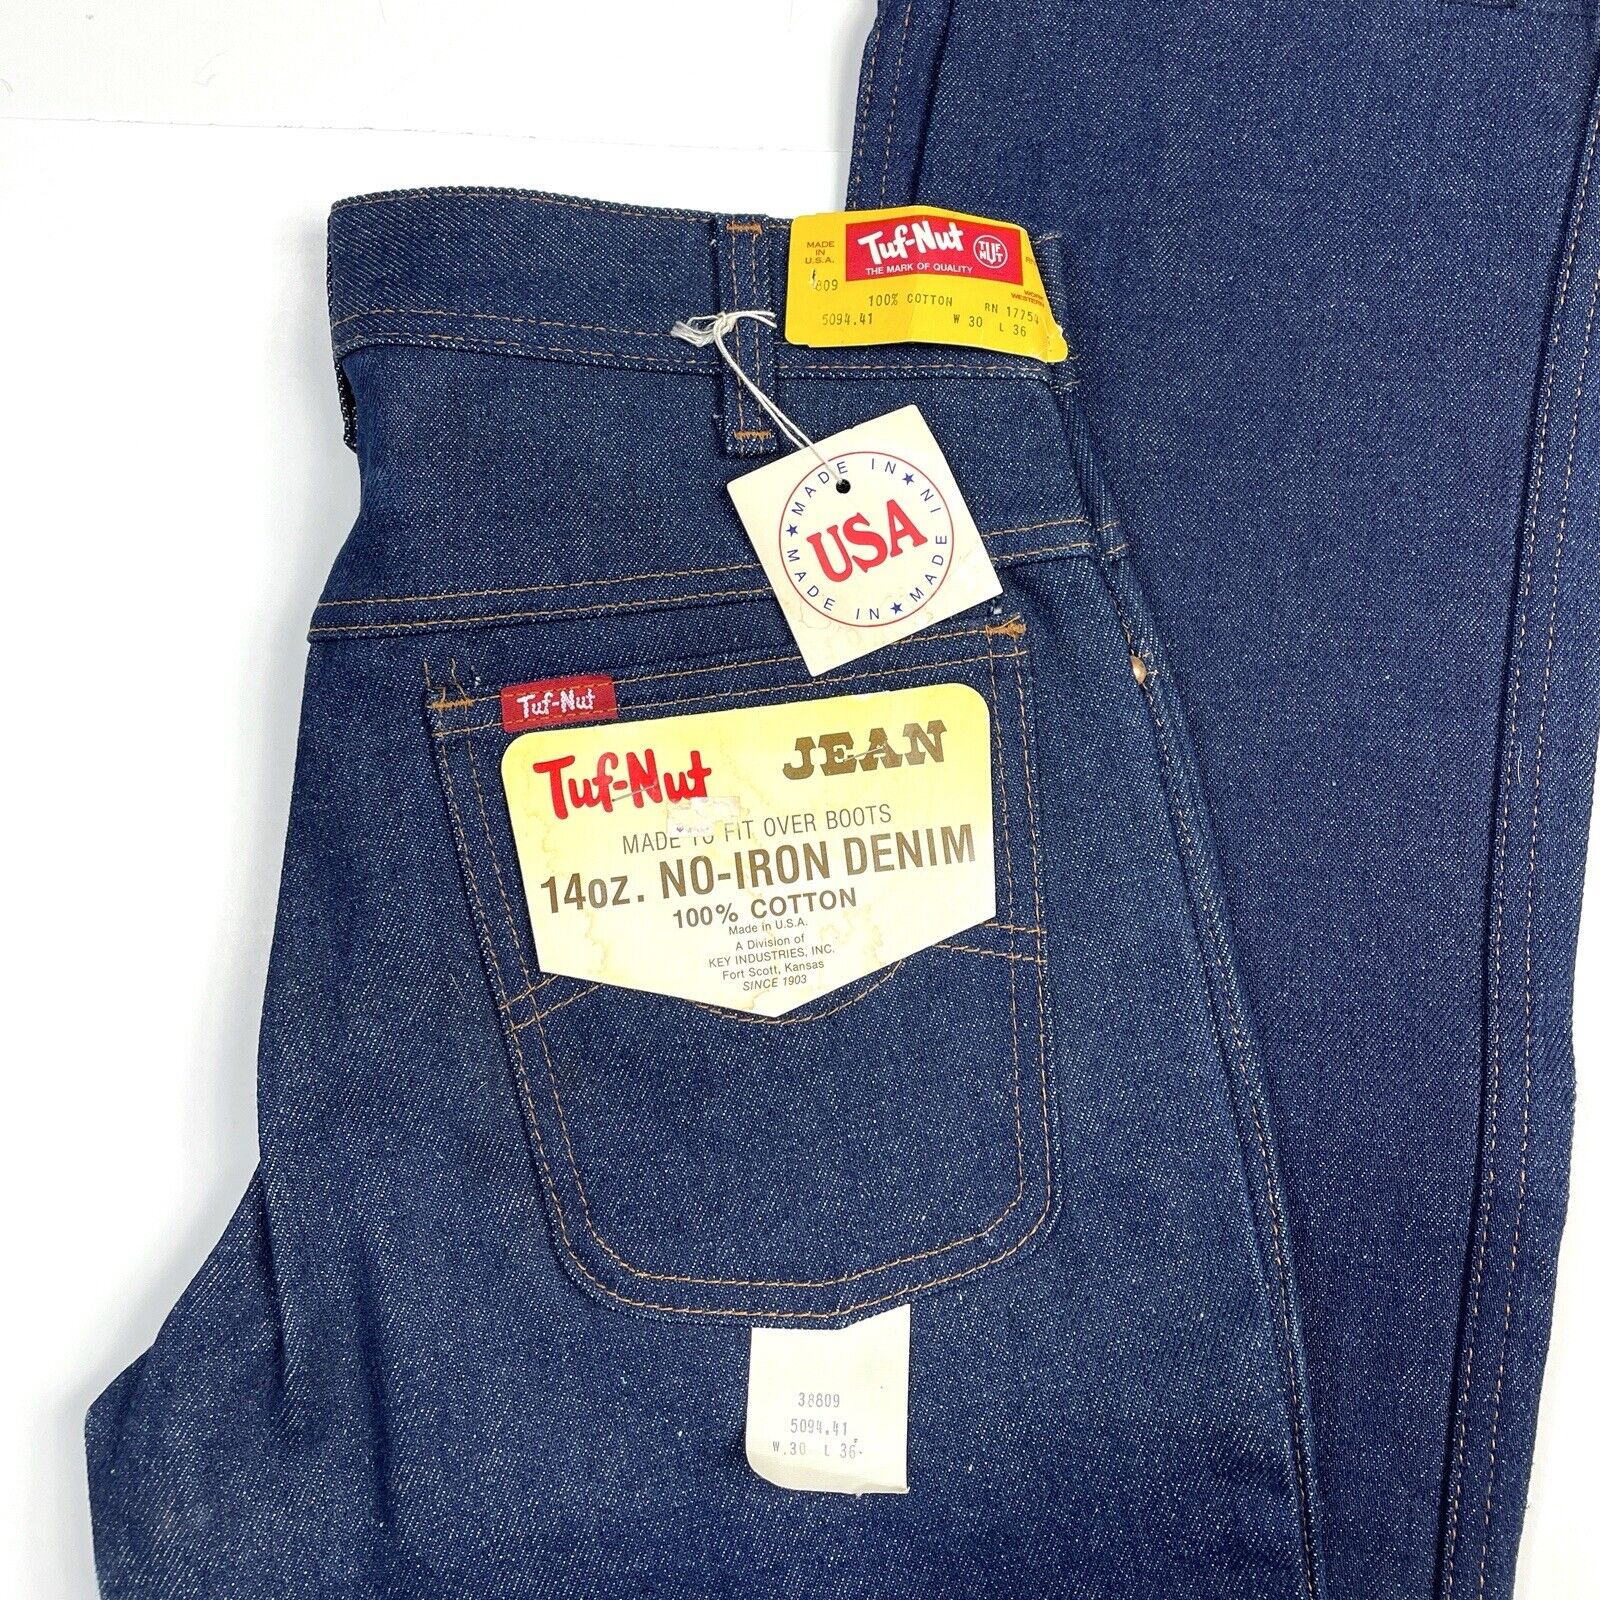 Vintage Tuf Nut Jeans Mens 30 X 36 No Iron Made In USA Fit Over Boots NOS